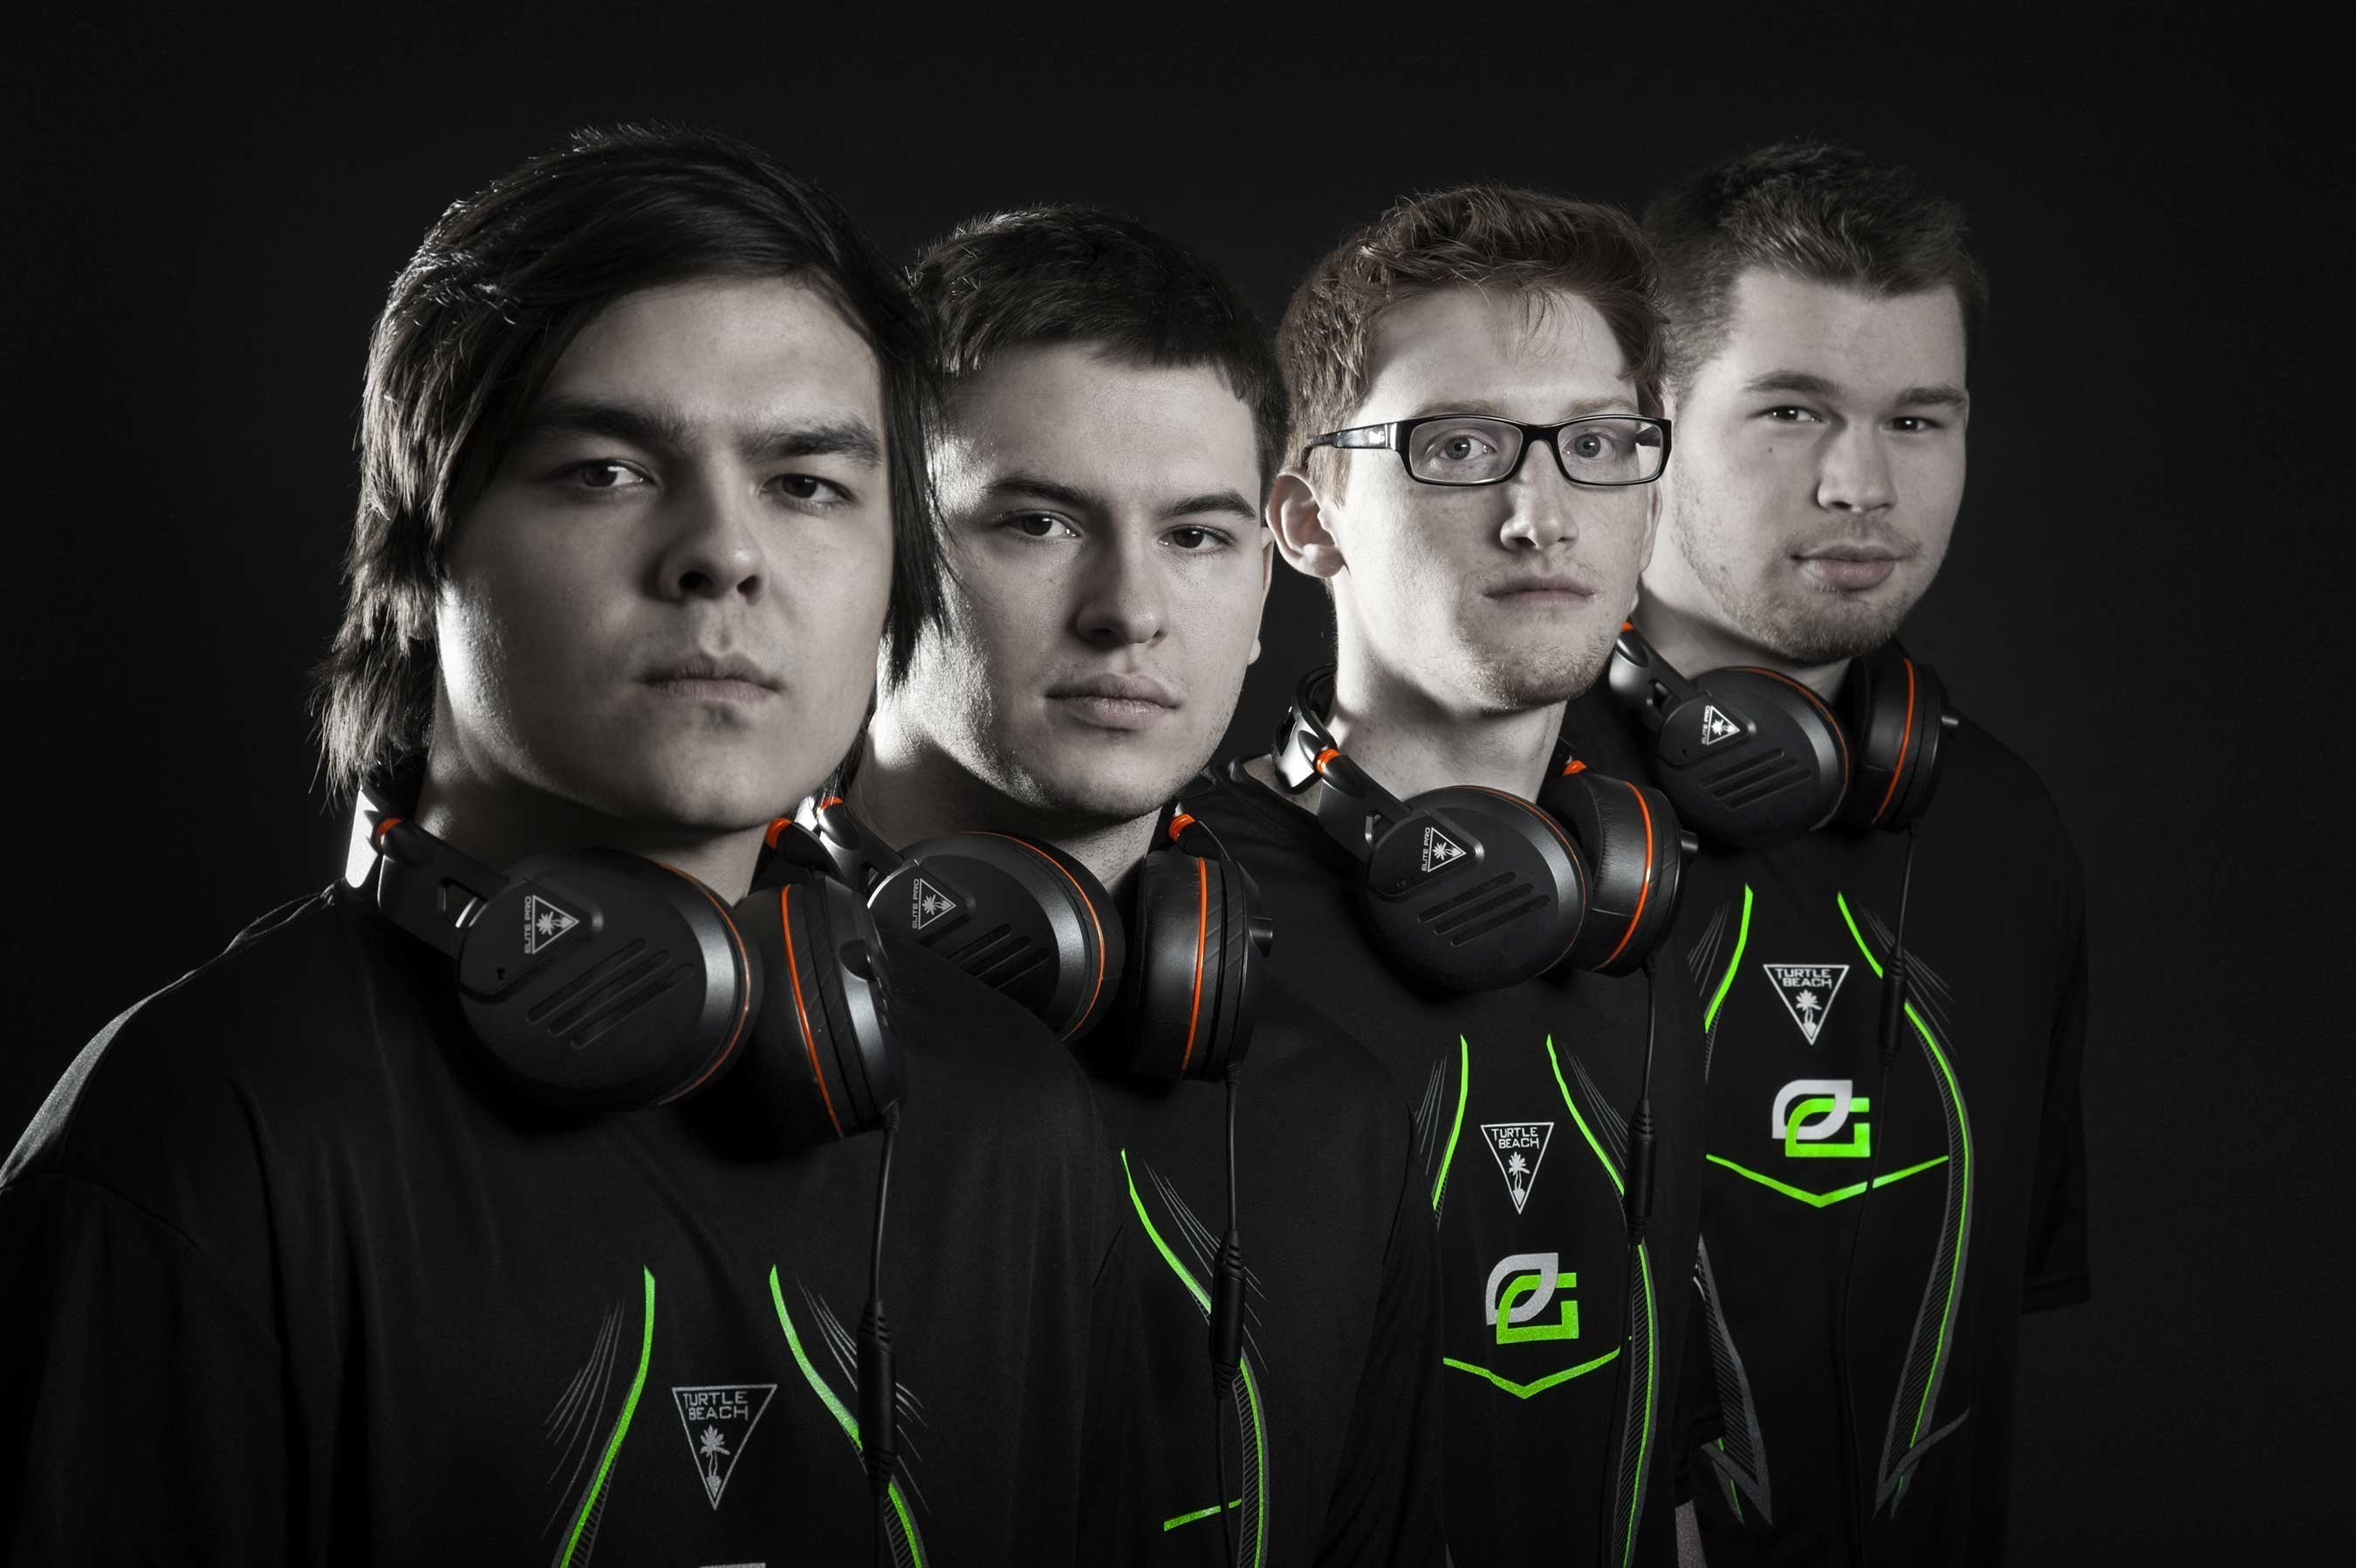 OpTic Gaming is one of the biggest and best eSports organizations in the world, and has partnered with Turtle Beach to use the Elite Pro as their preferred gaming headset and audio gear.